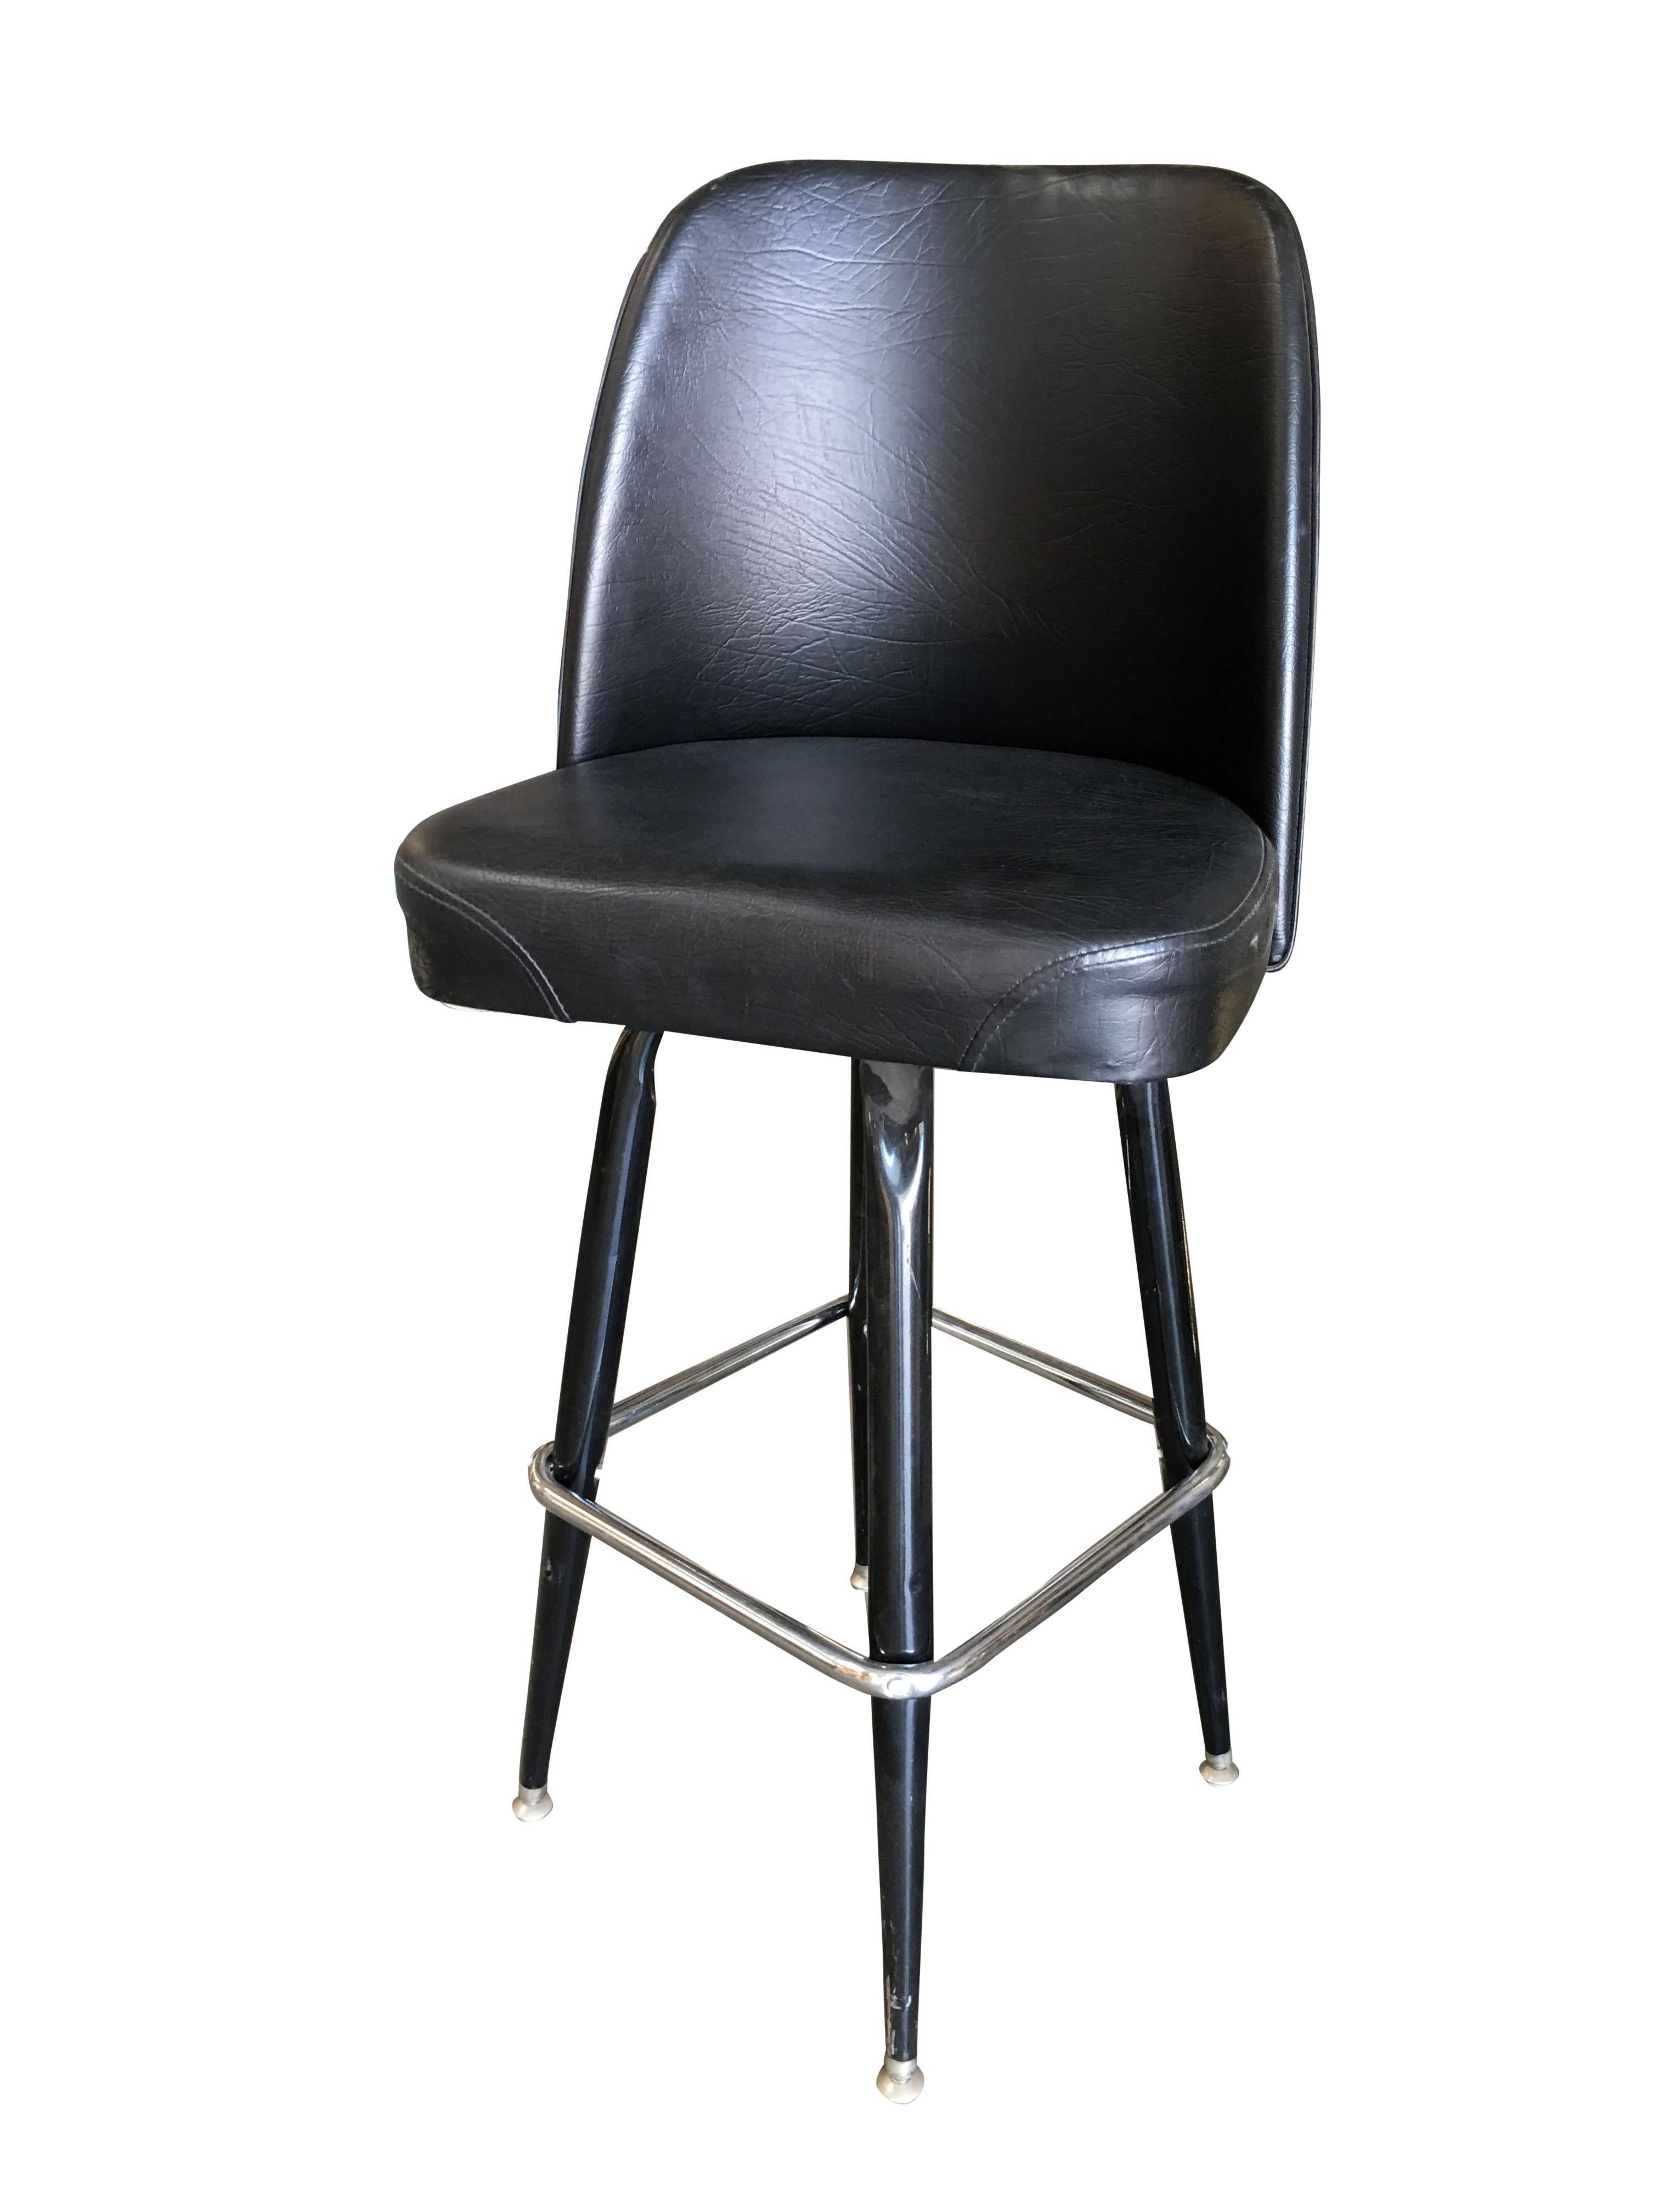 Set of four Knoll inspired Modernist style bar stool featuring a soft lounge like bucket seat on black pounder coat steel base with chrome footrest.